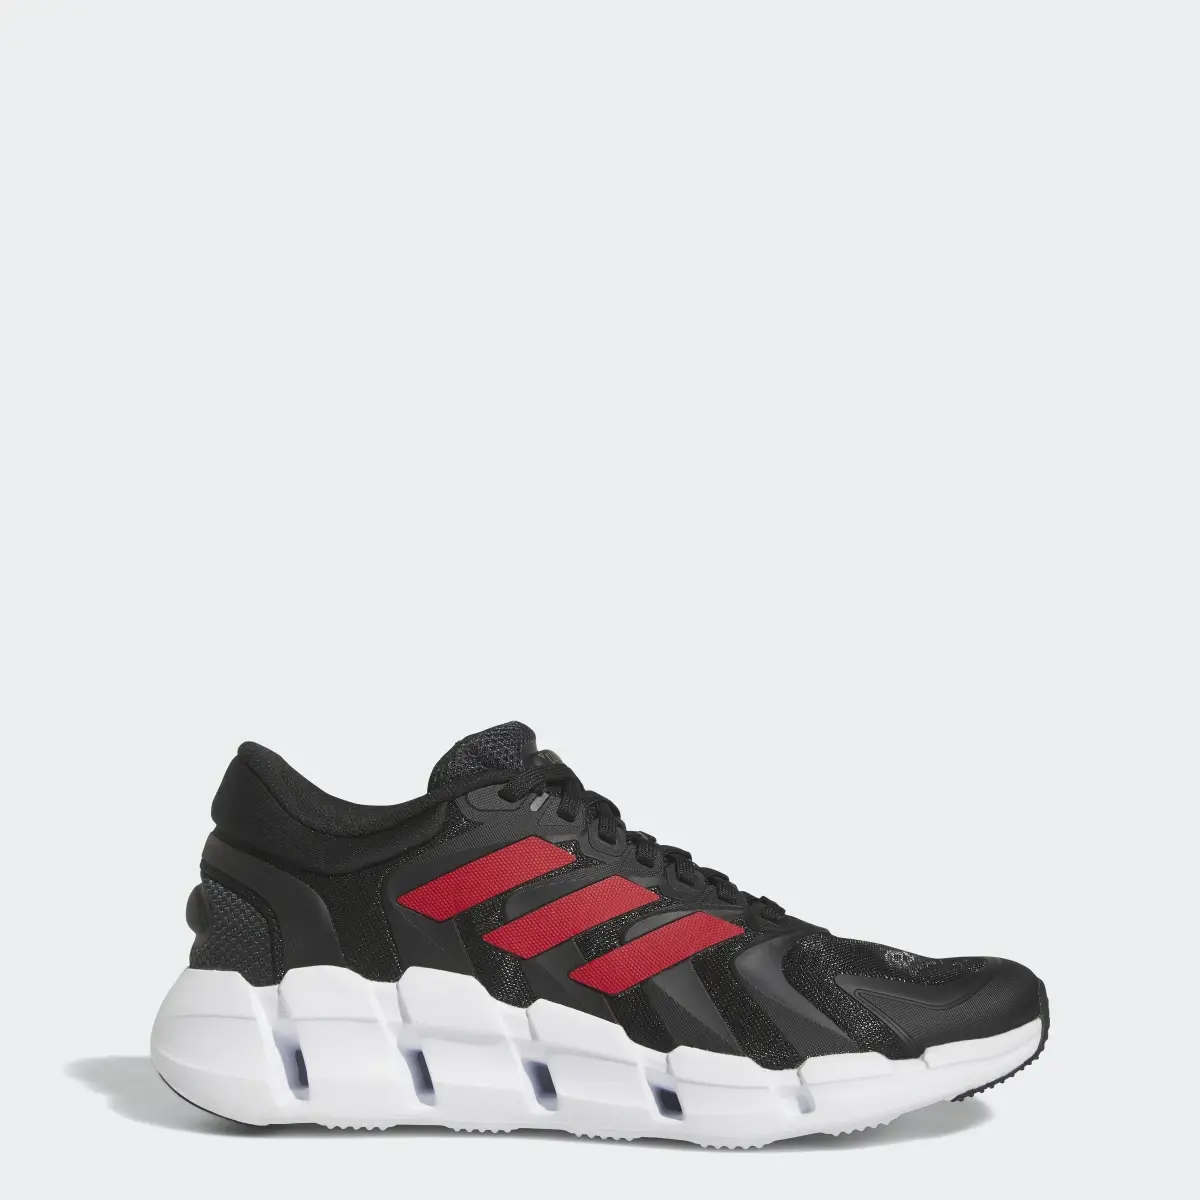 Adidas Chaussure Climacool Ventice. 1